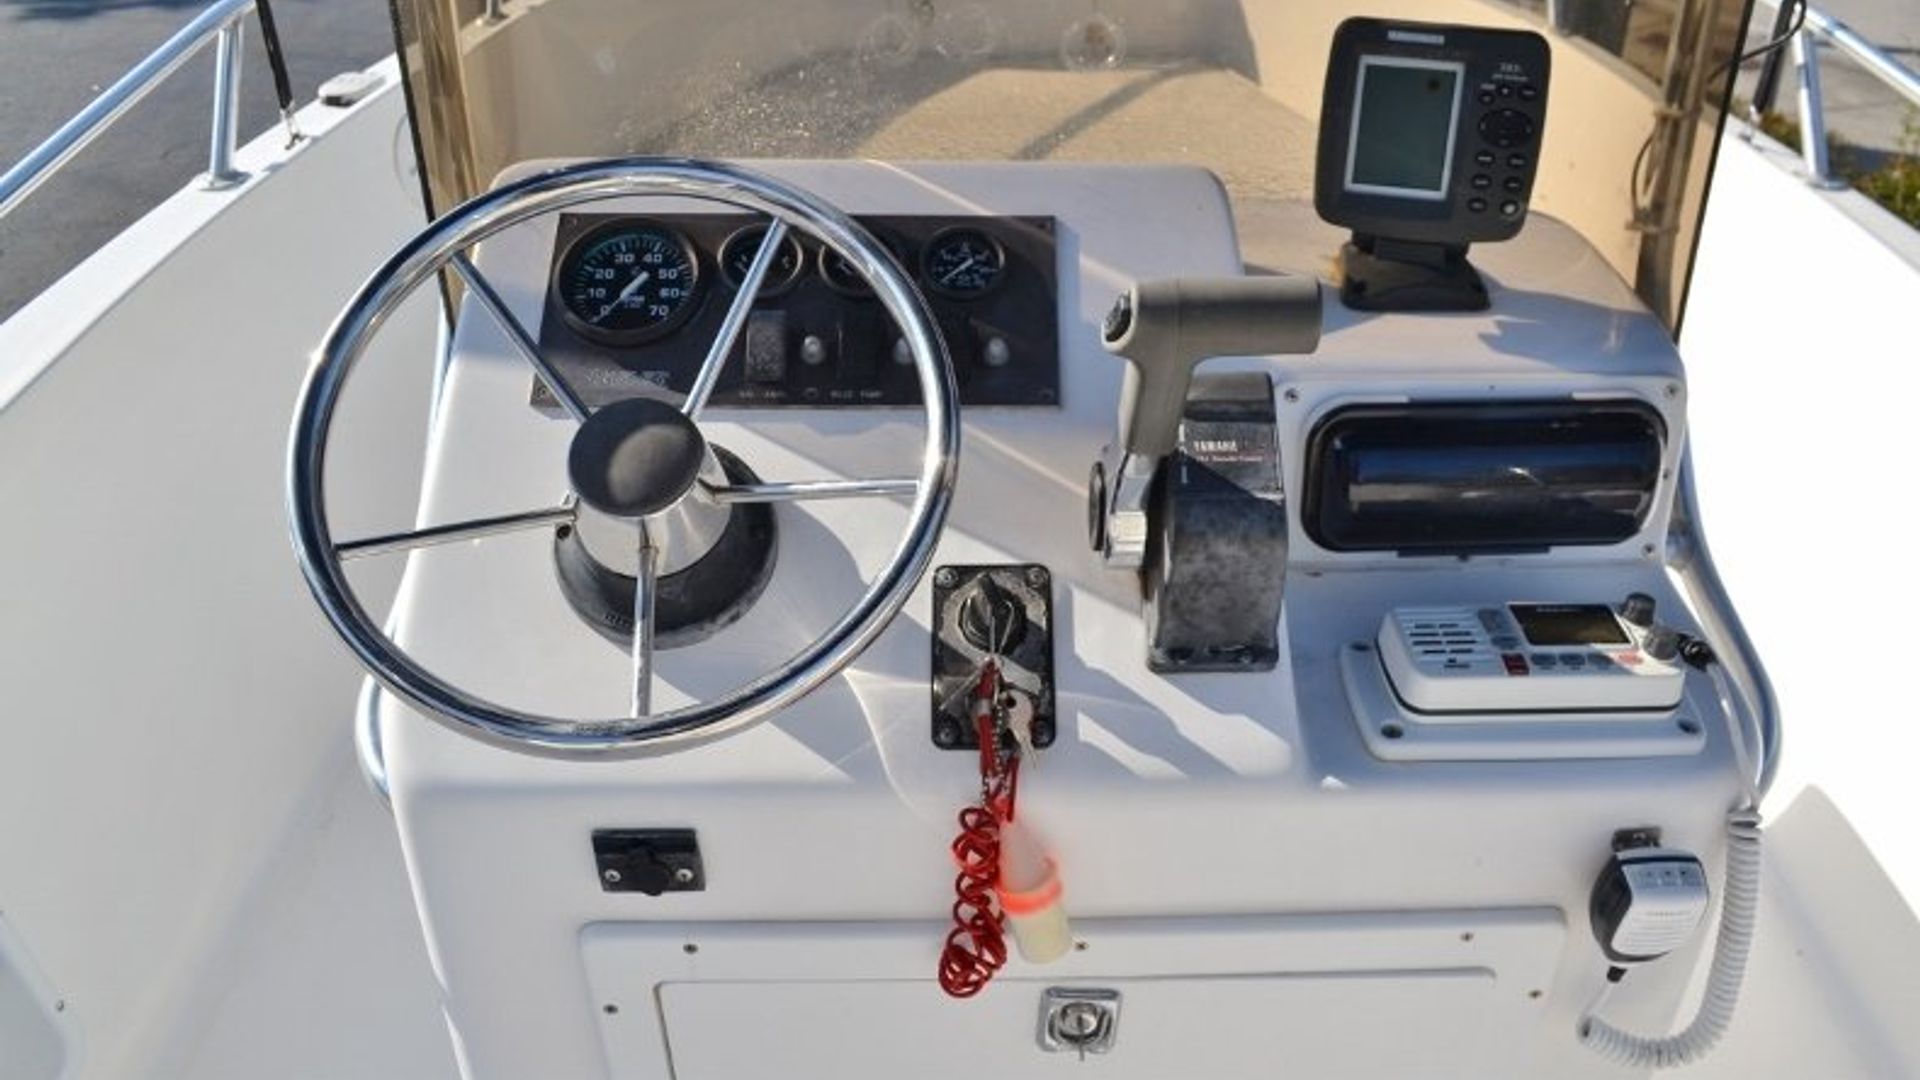 Used 2002 Angler 18 Center Console #0104 image 9